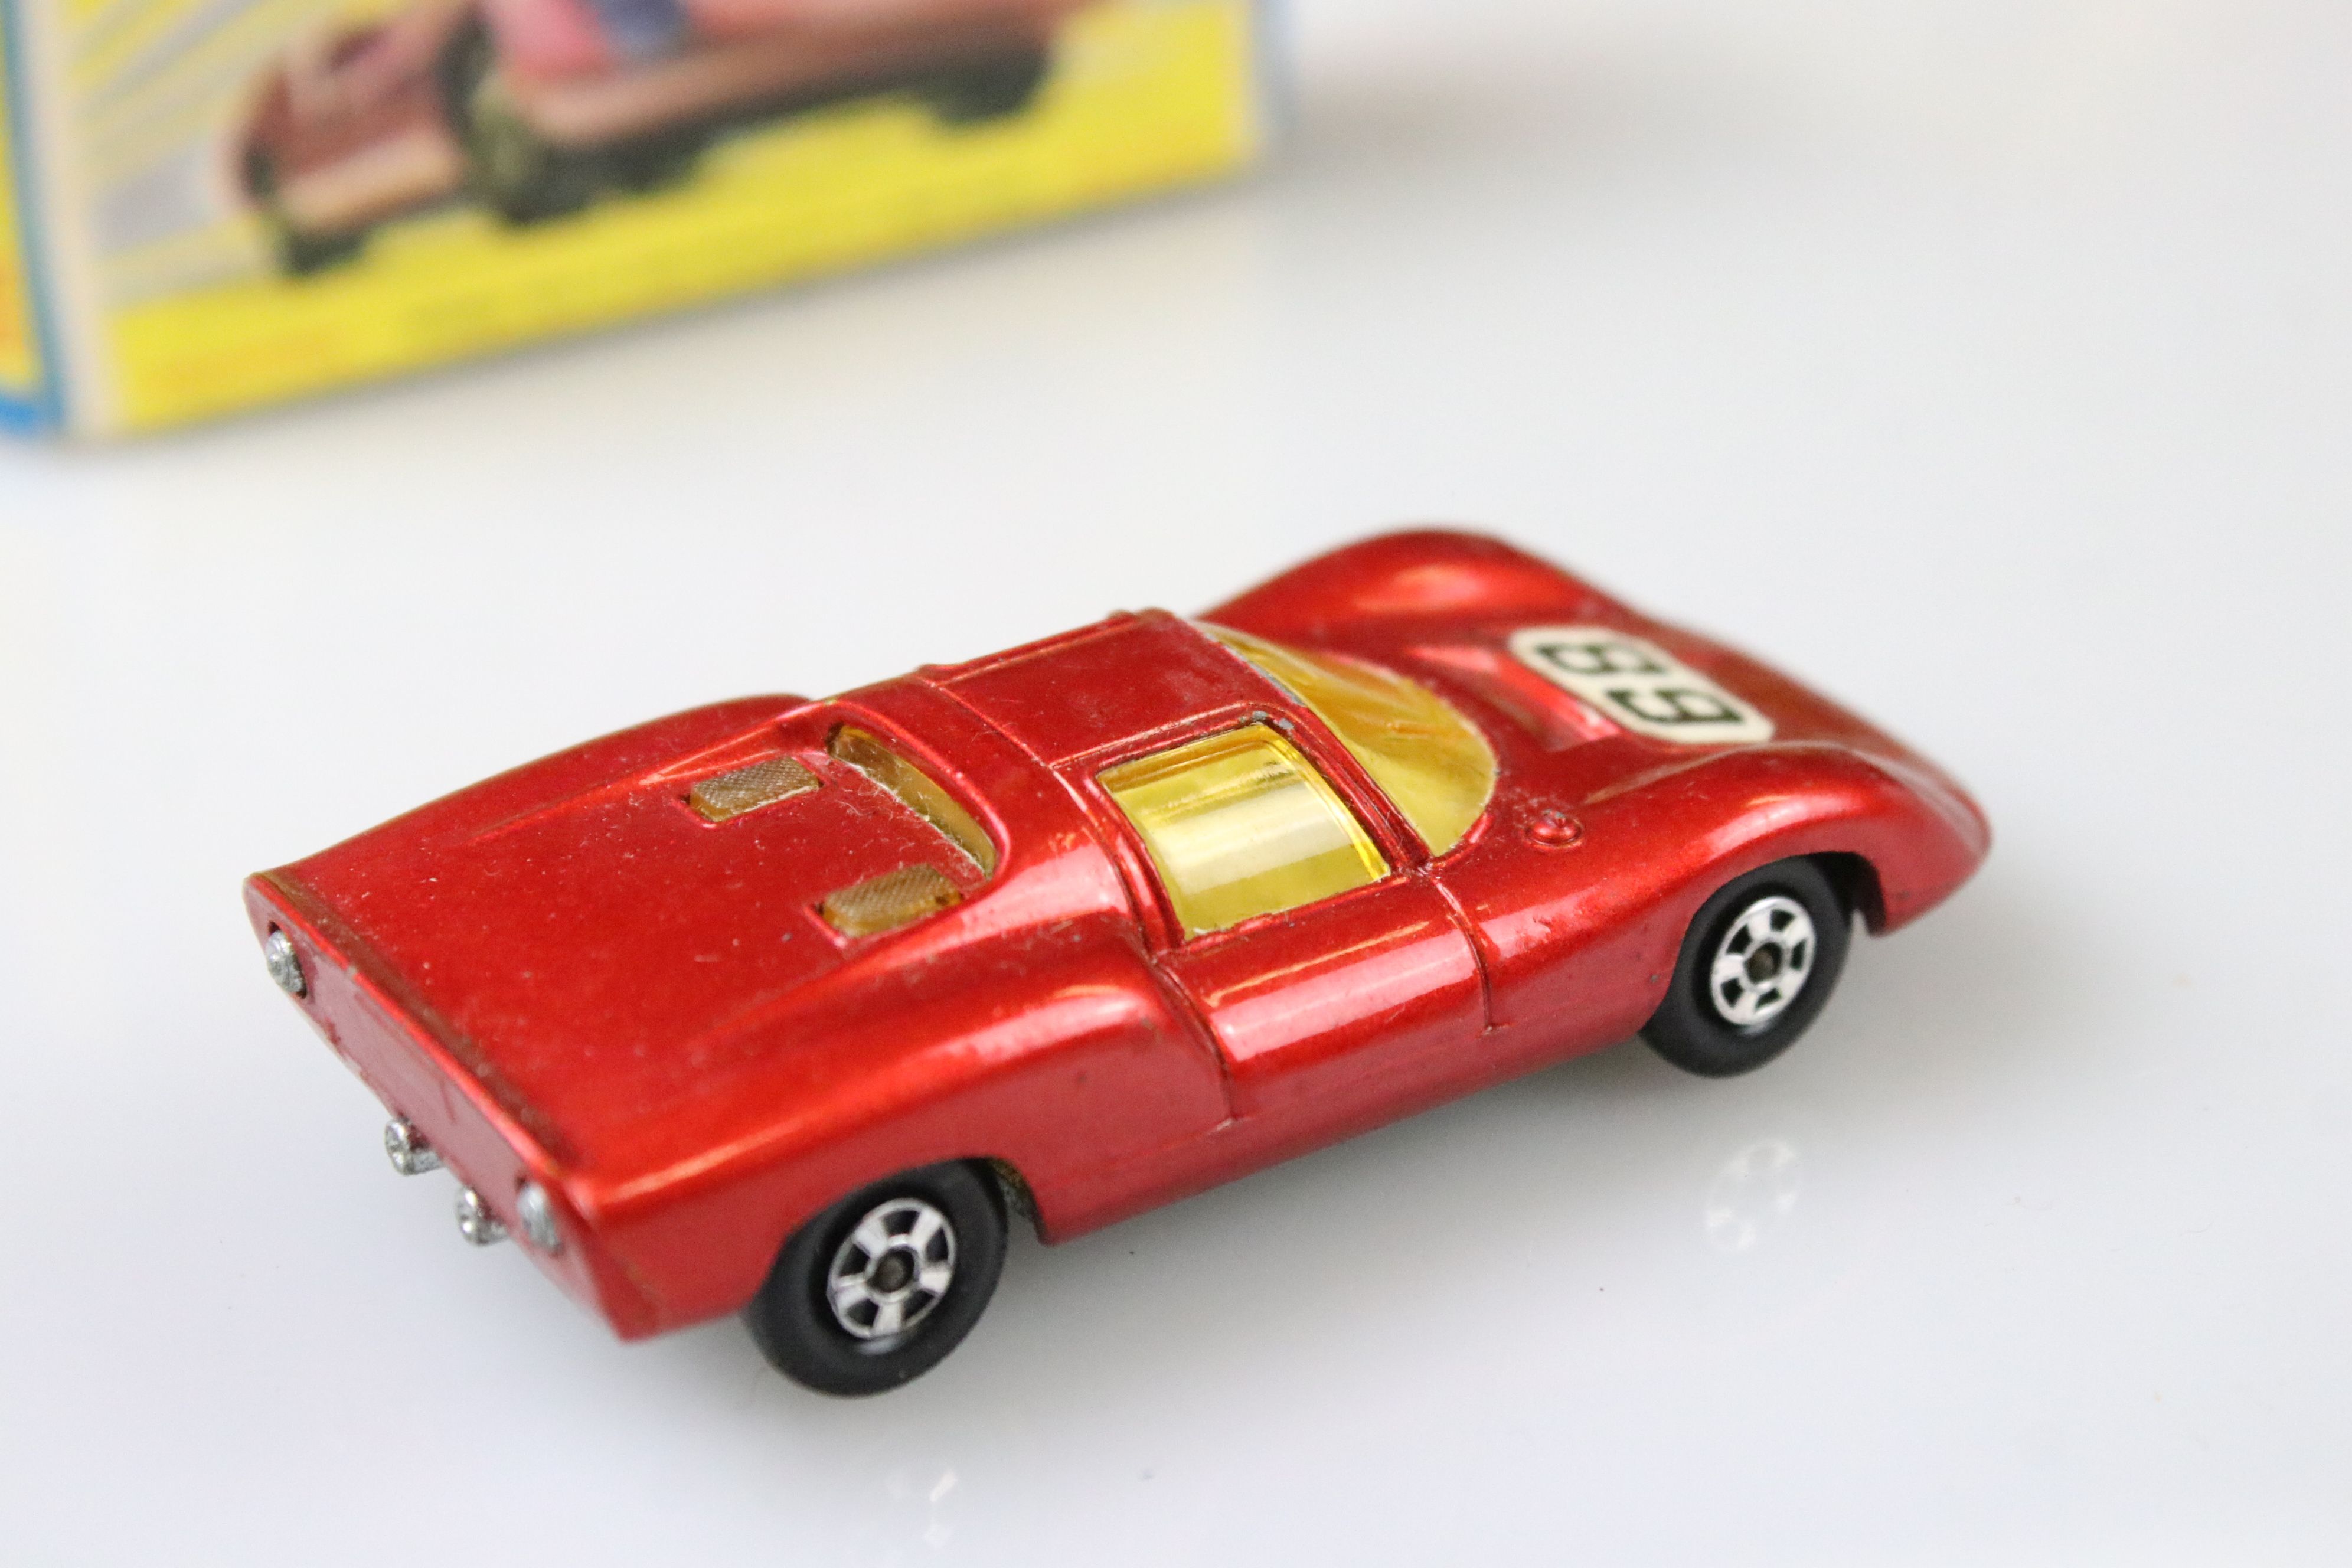 17 Boxed Matchbox Superfast diecast models to include 41 Ford GT, 29 Racing Mini, 57 Landrover - Image 33 of 53